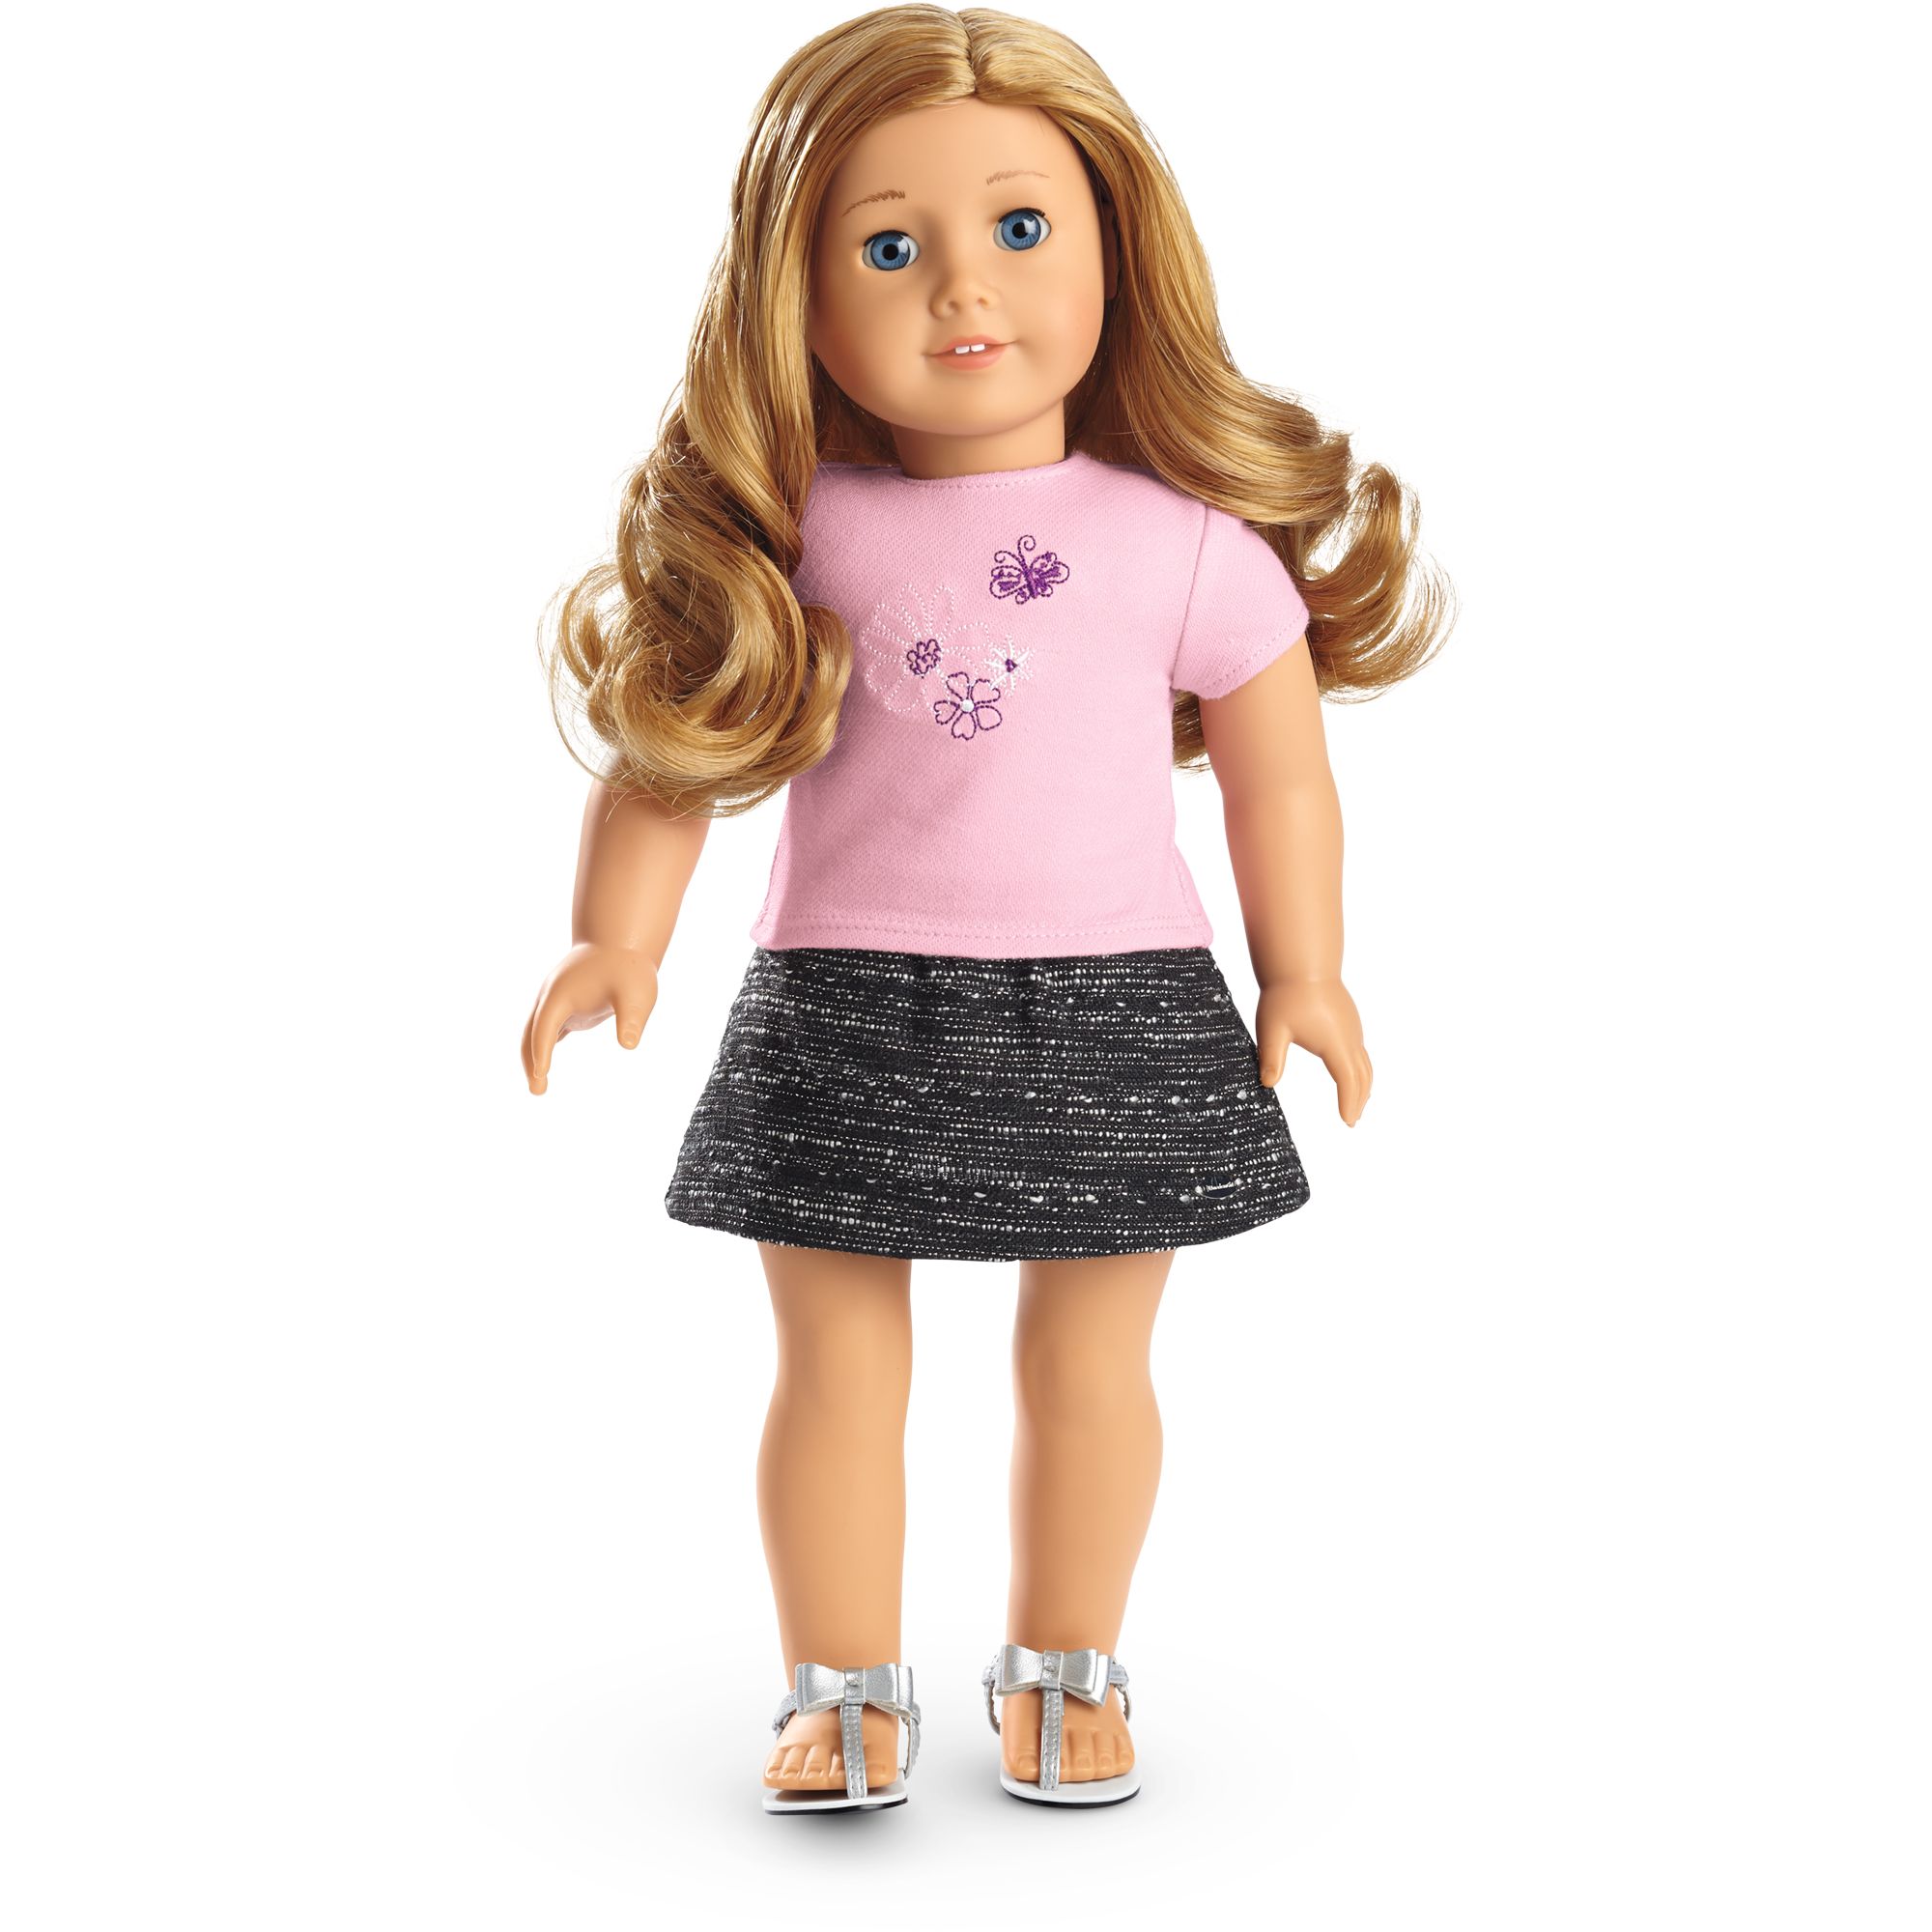 Pale Pink and Tweed Outfit, American Girl Wiki